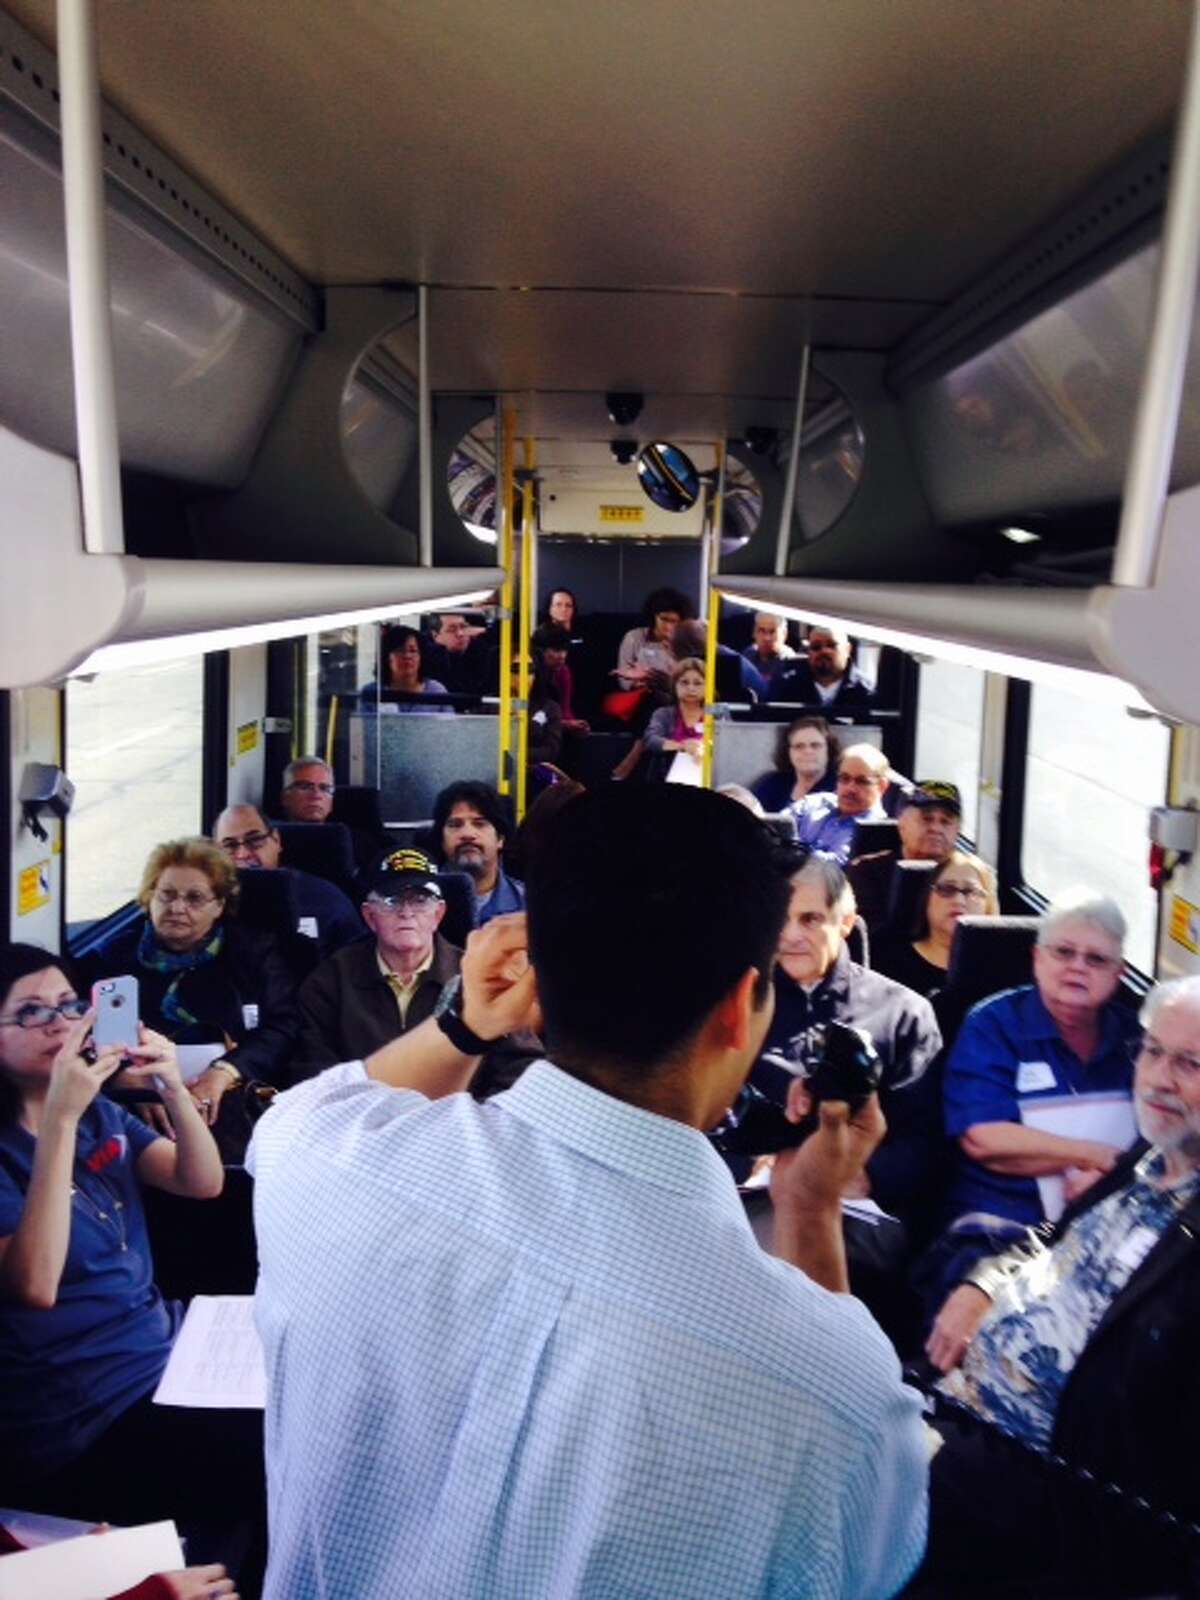 District 4 Councilman Rey Saldaña hosted a town hall meeting on a VIA Metropolitan Transit bus late last year. He is co-chairing a committee that will examine funding sources the agency could use to improve its system.